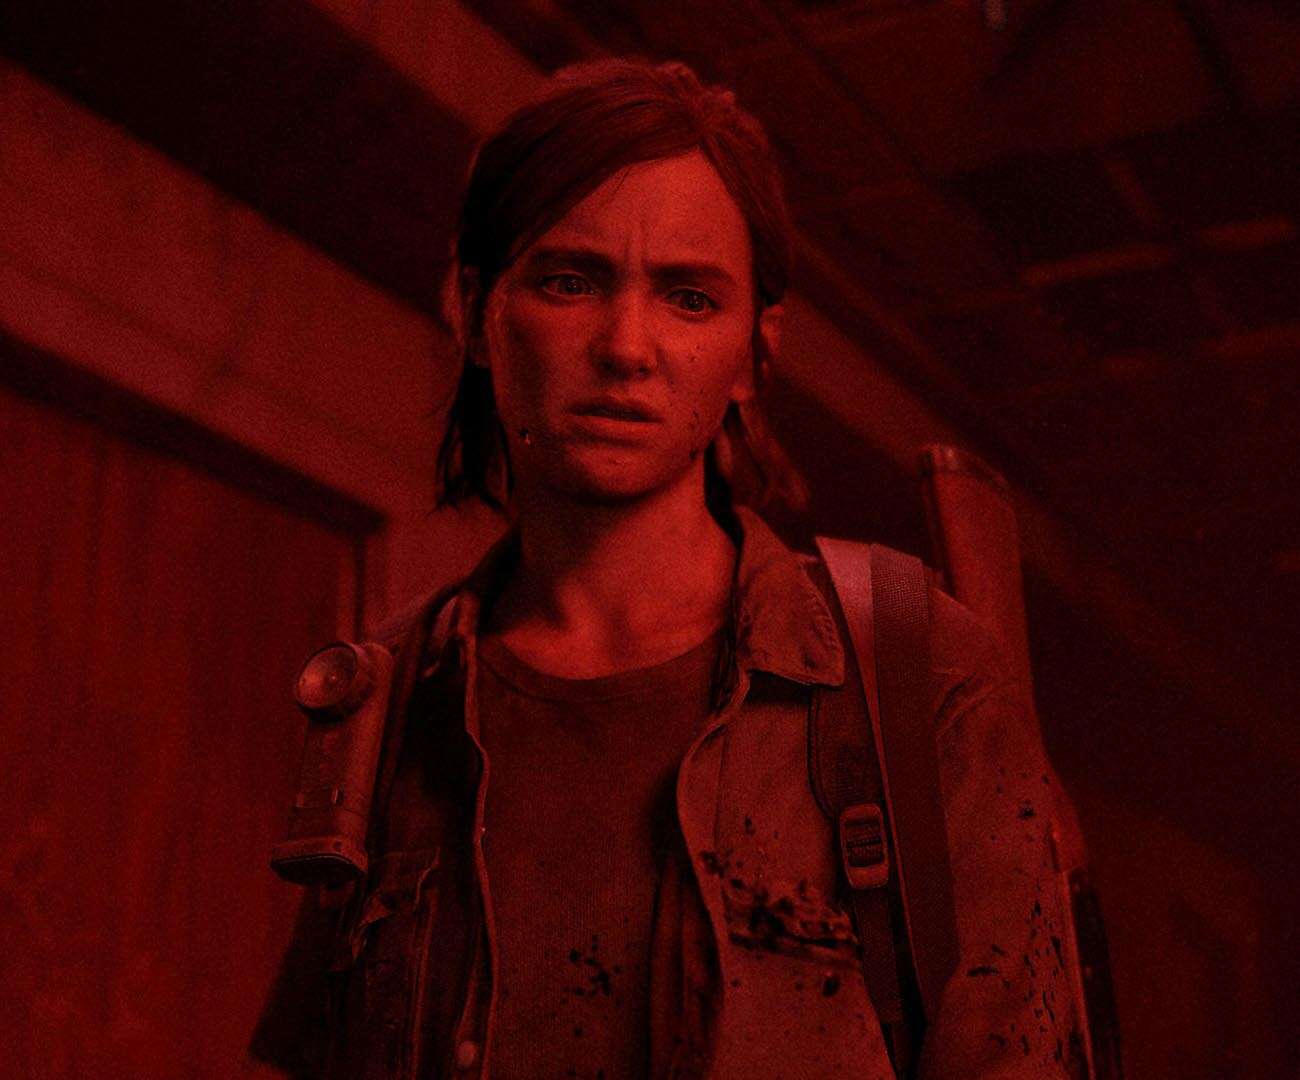 ellie the last of us part 2, the last of us part 2